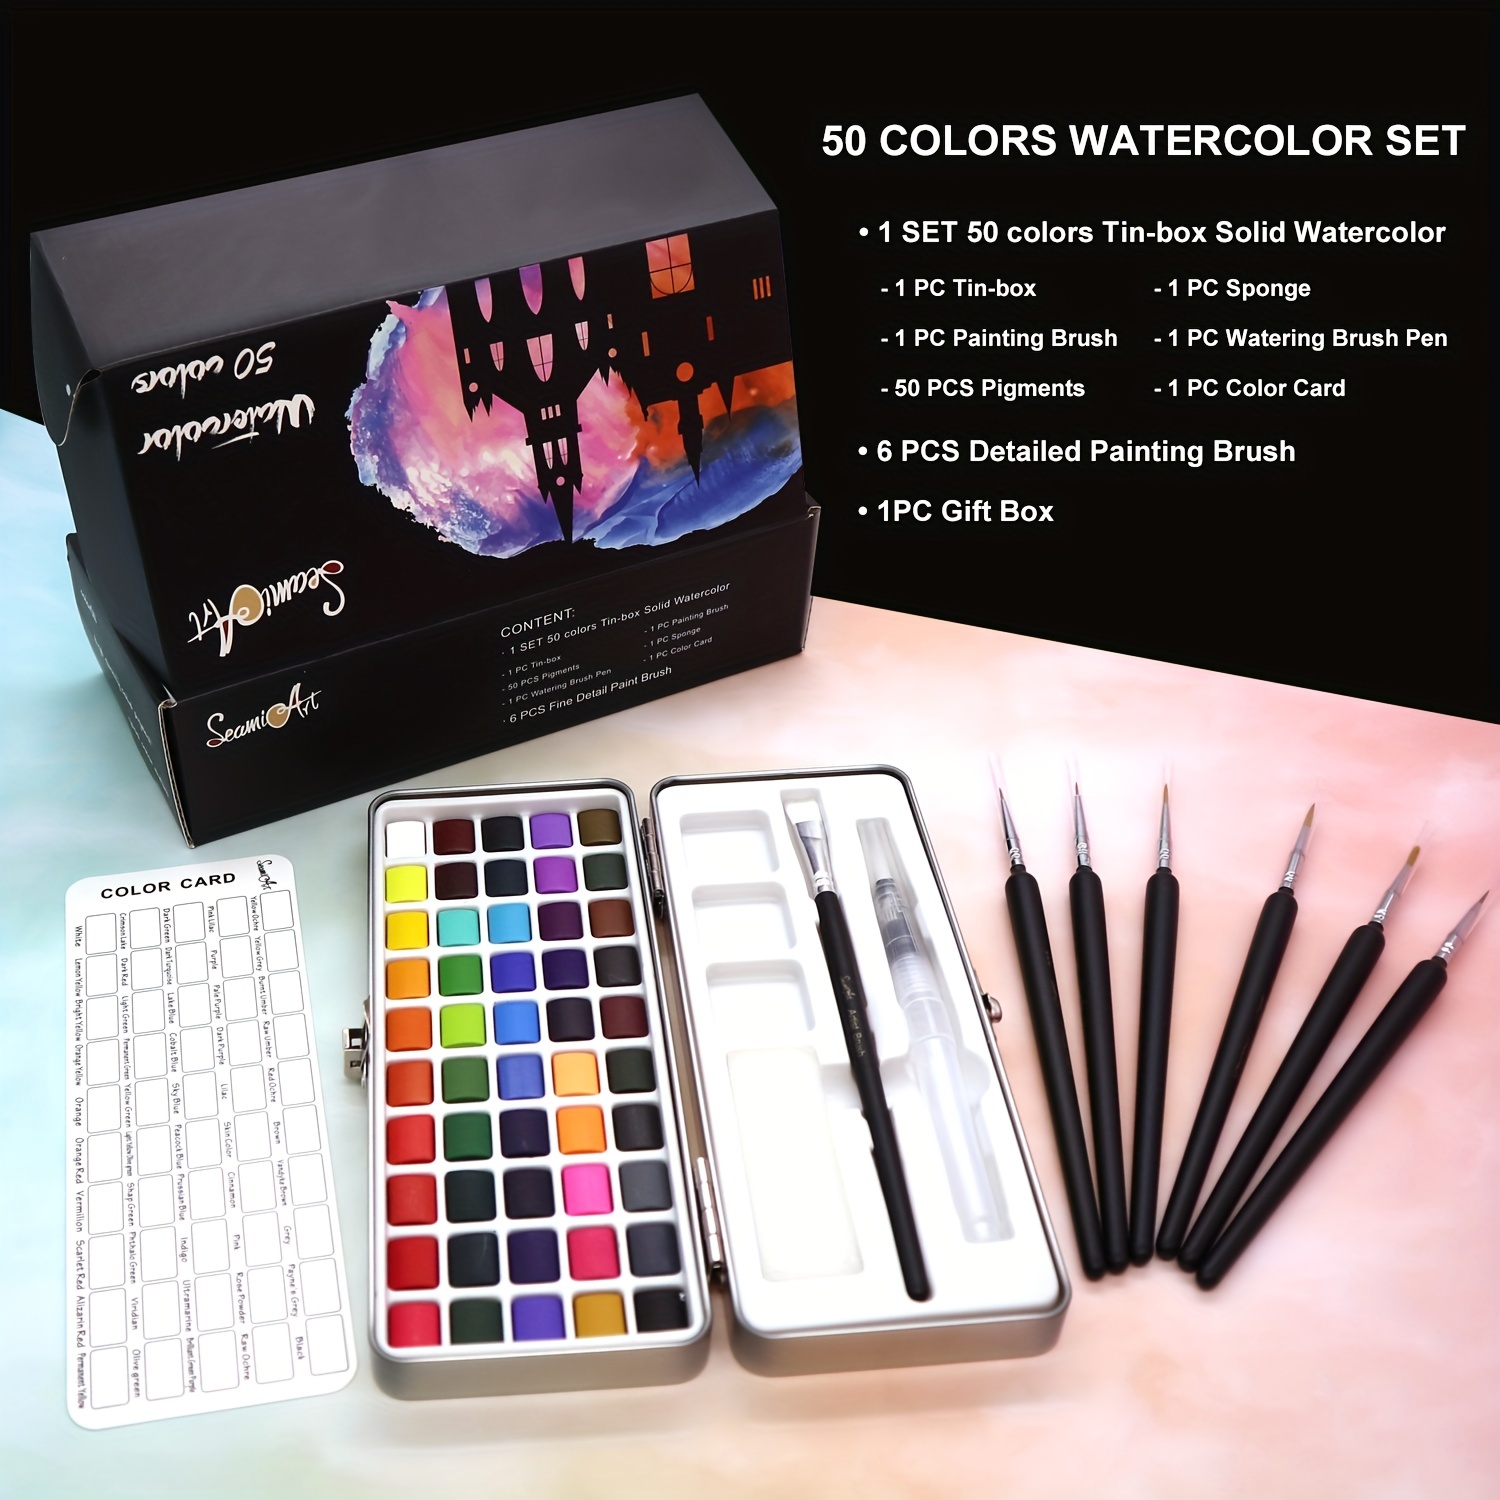 MeiLiang 52 Watercolor Paint Set, Travel Watercolors Set with Drawing  Pencil, Paint Brushes, 5 Watercolor Paper, Sponge & Black Drawing Pens,  Water